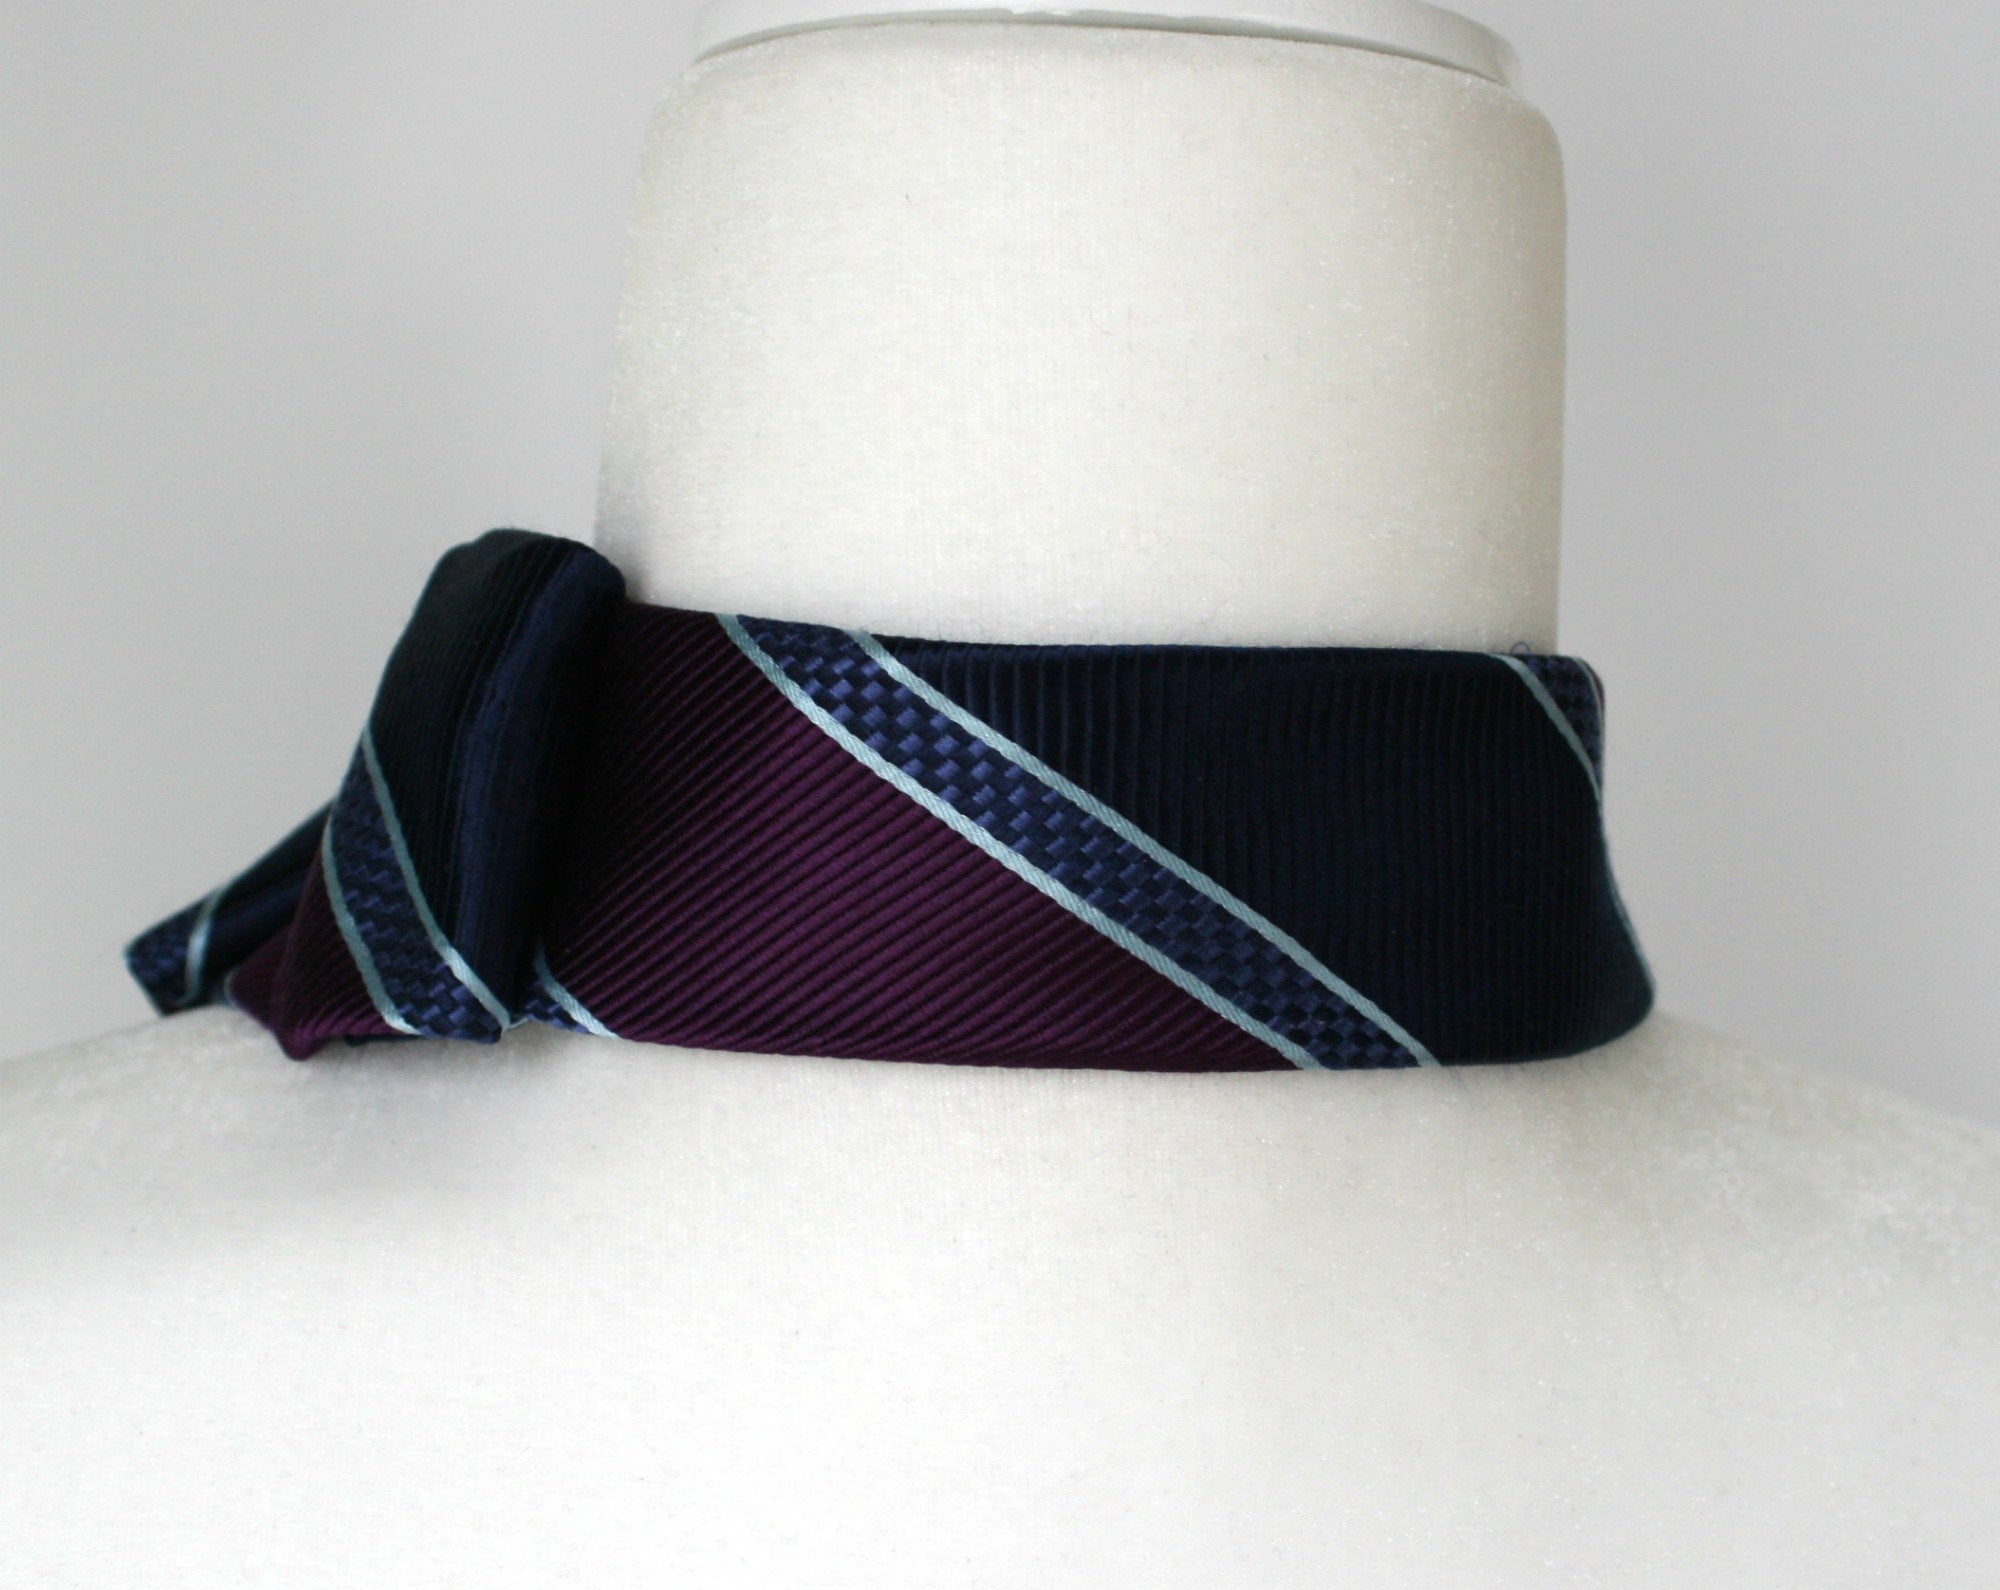 Women's Ascot Scarf Made From A Vintage Navy And Purple Striped Necktie.